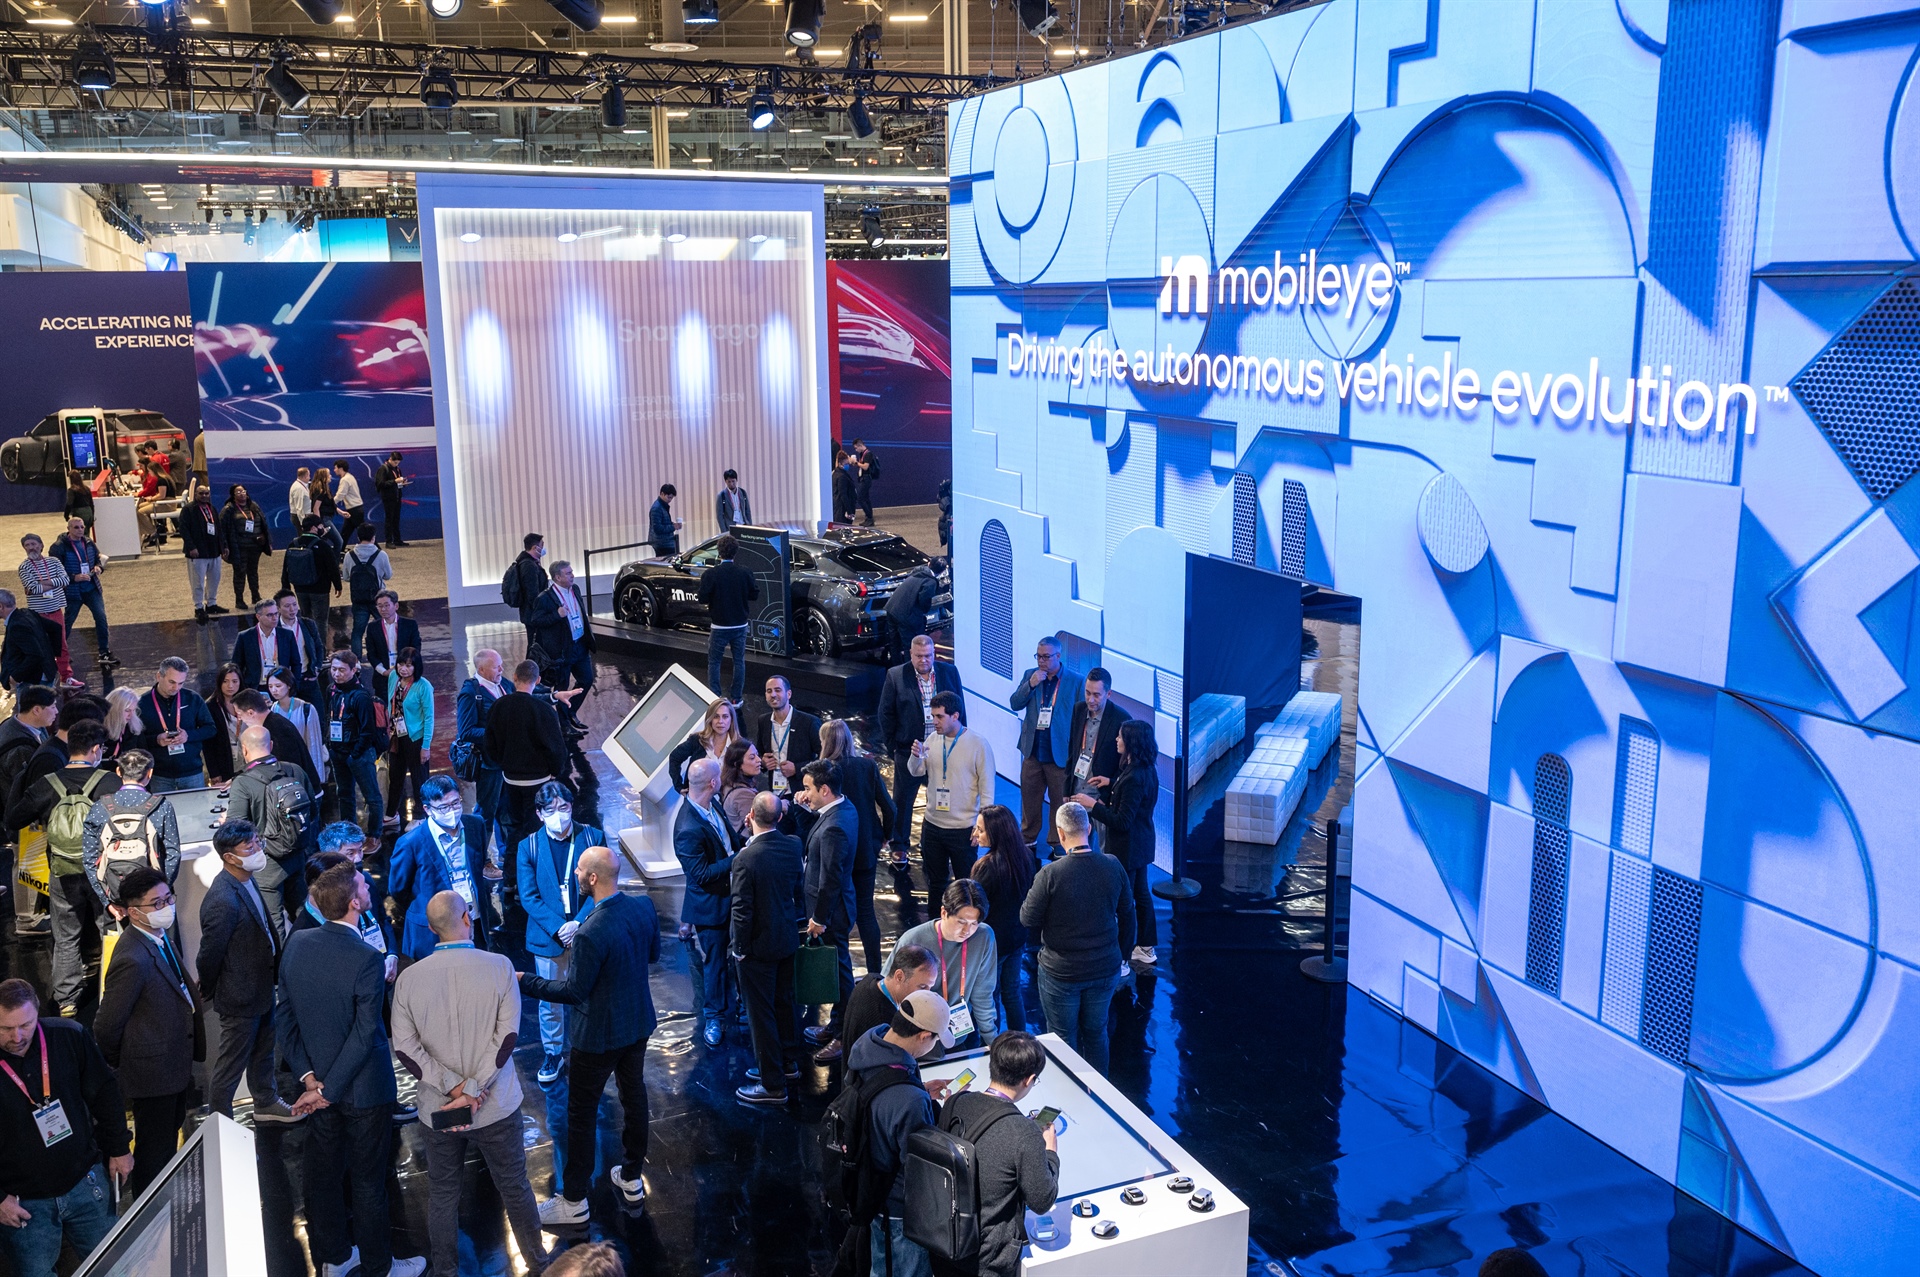 The Mobileye booth at CES 2023 (Credit: Mobileye)